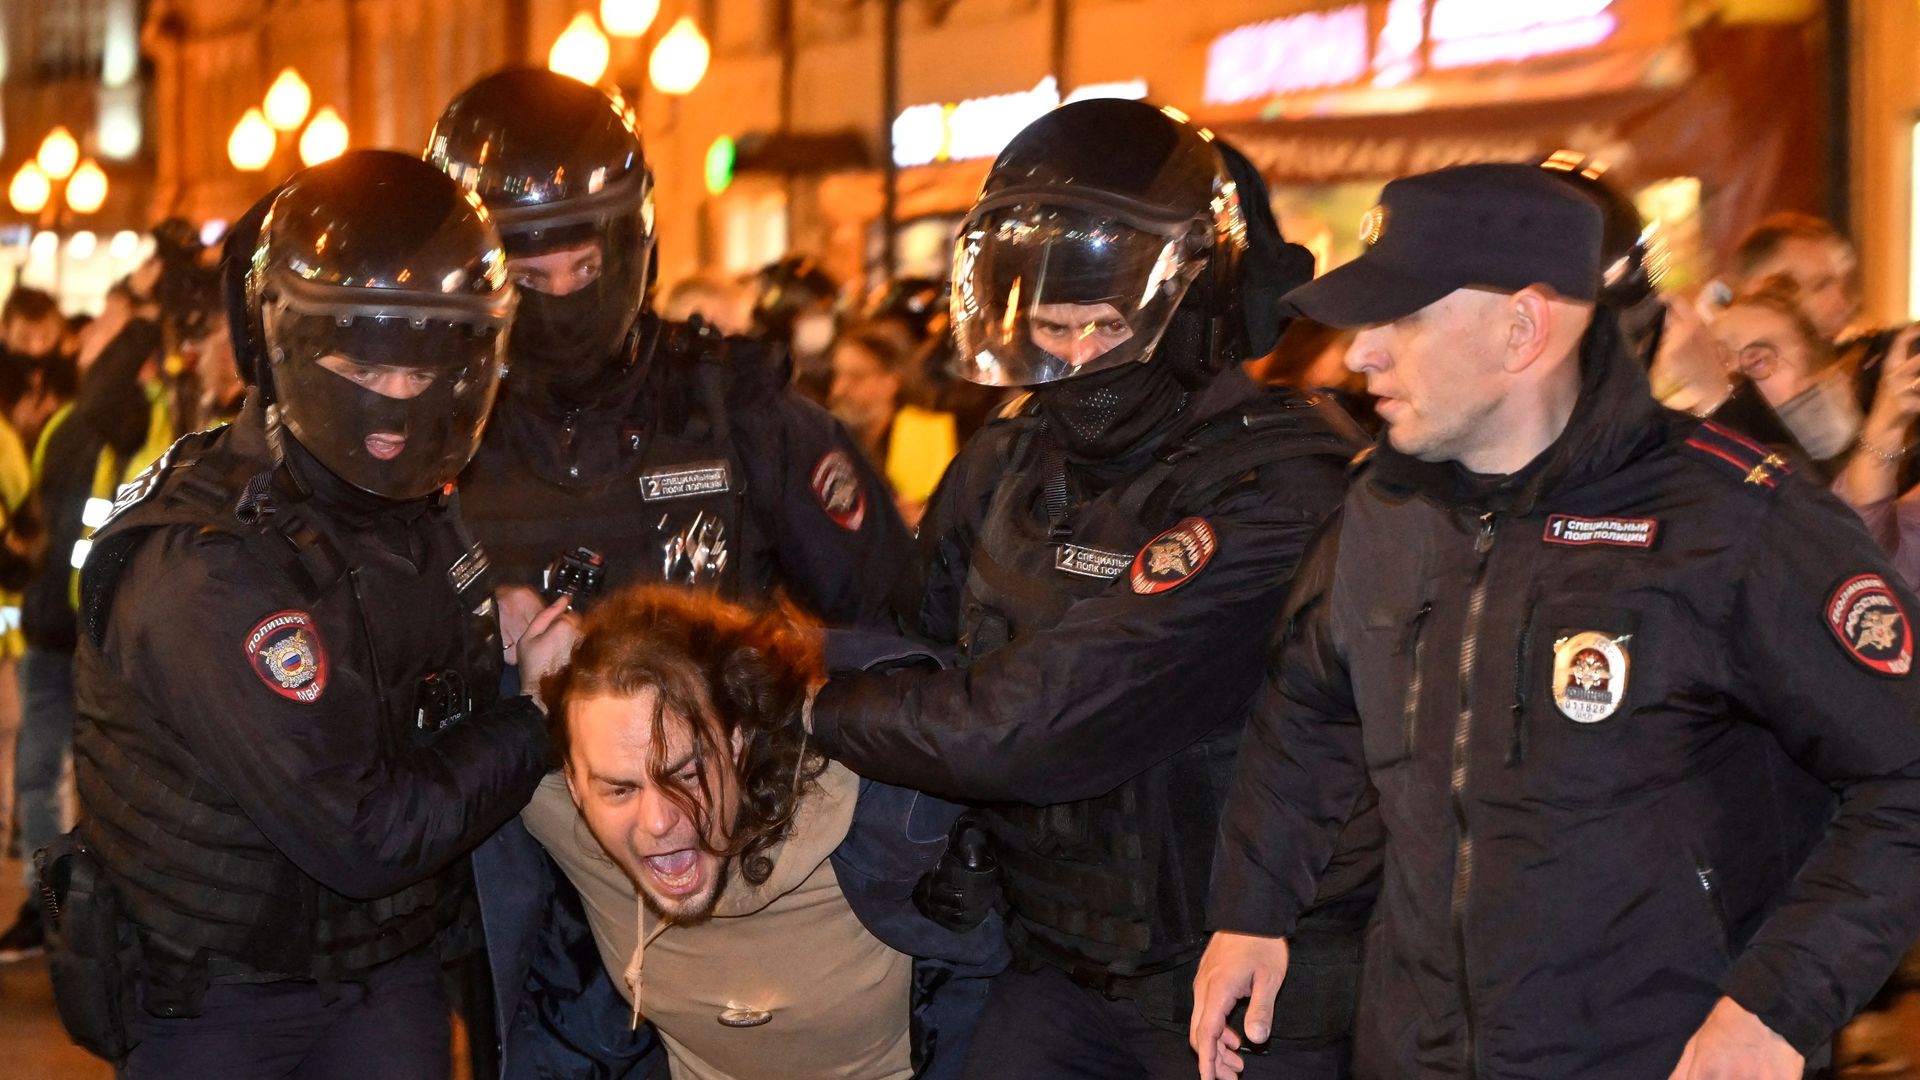 Police detaining a person in Moscow on Sept. 21 for participating in a demonstration against the mobilization order.